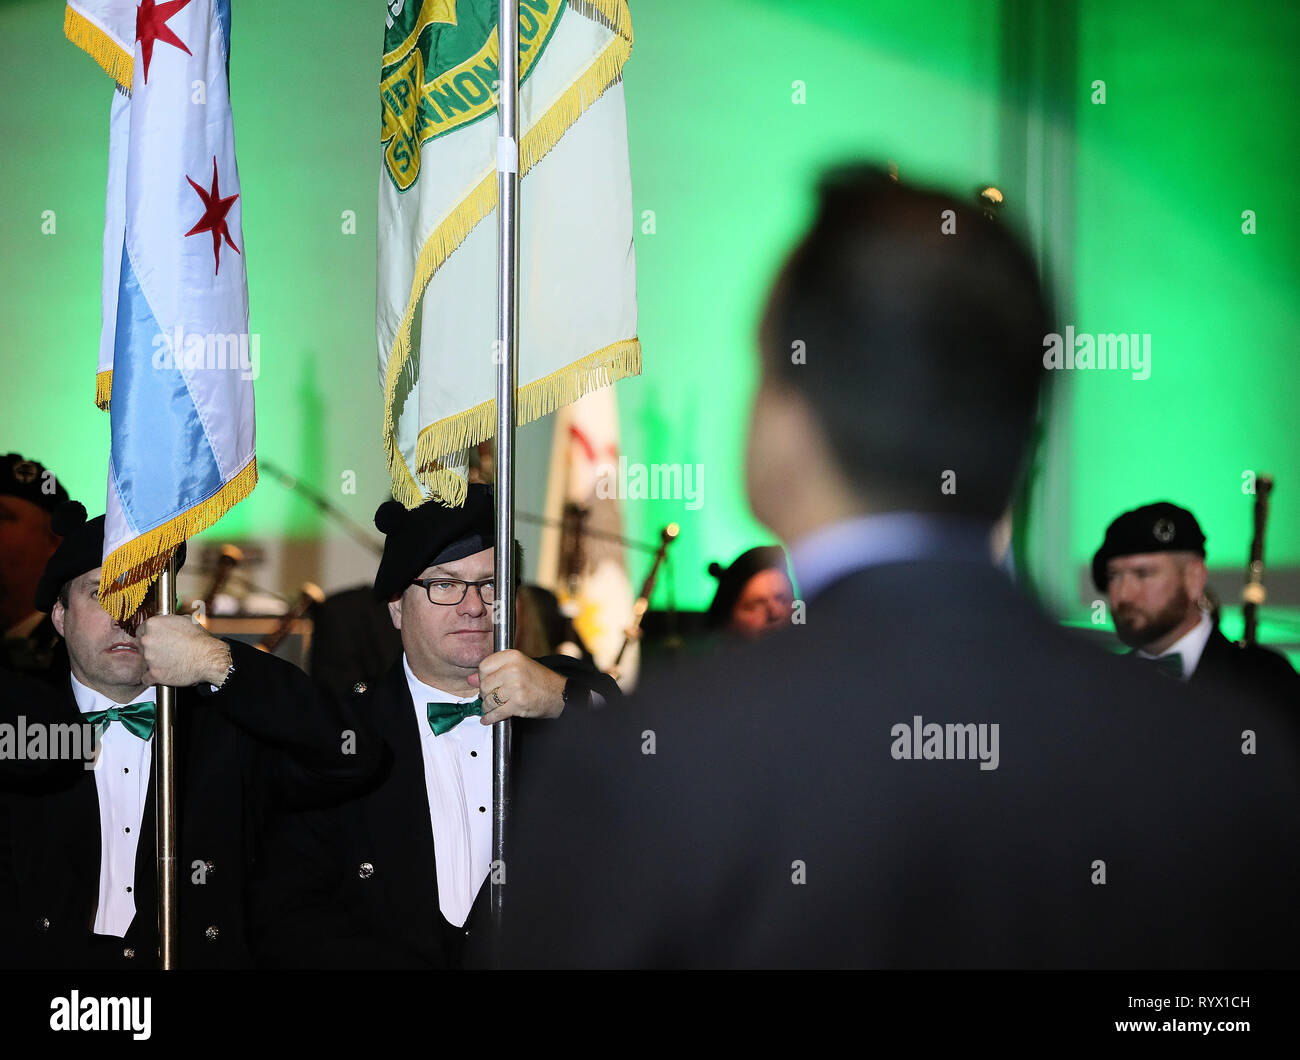 Flag bearers at the Irish Fellowship Club Annual SPD Dinner at the Hilton Hotel, Chicago, during Taoiseach Leo Varadkar's visit to the United States. Stock Photo